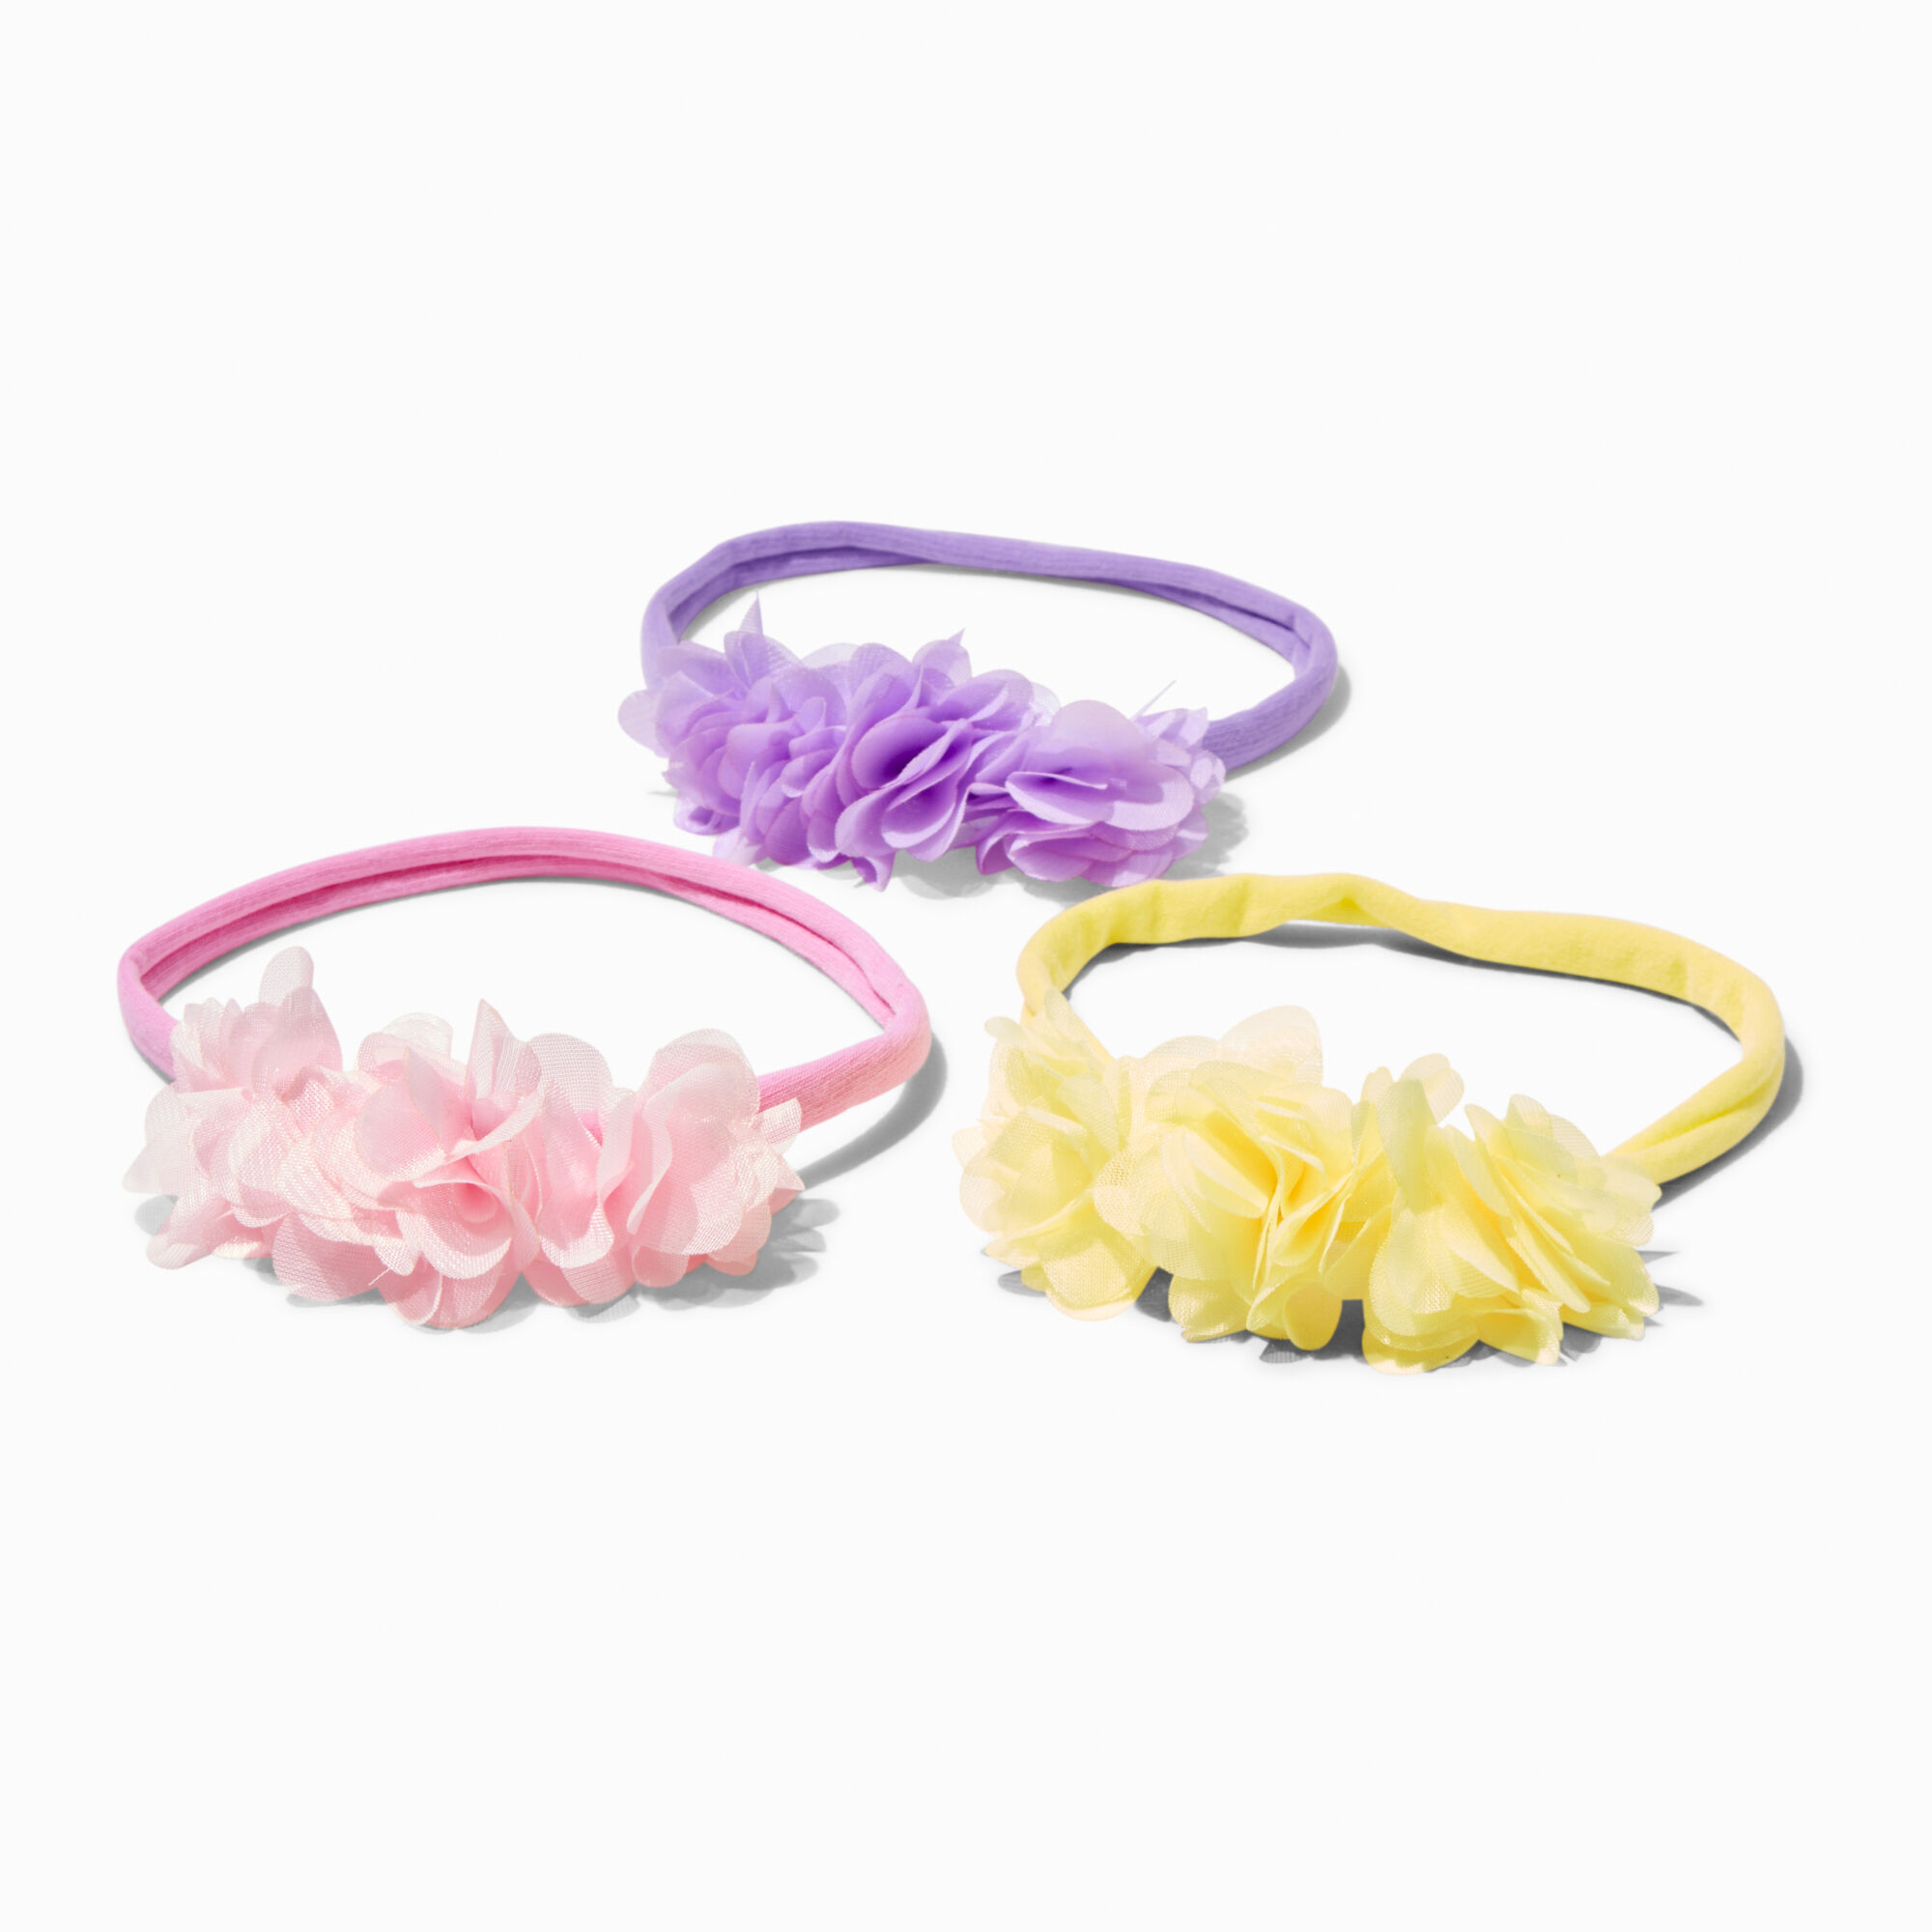 View Claires Club Floral Bow Headwraps 3 Pack information